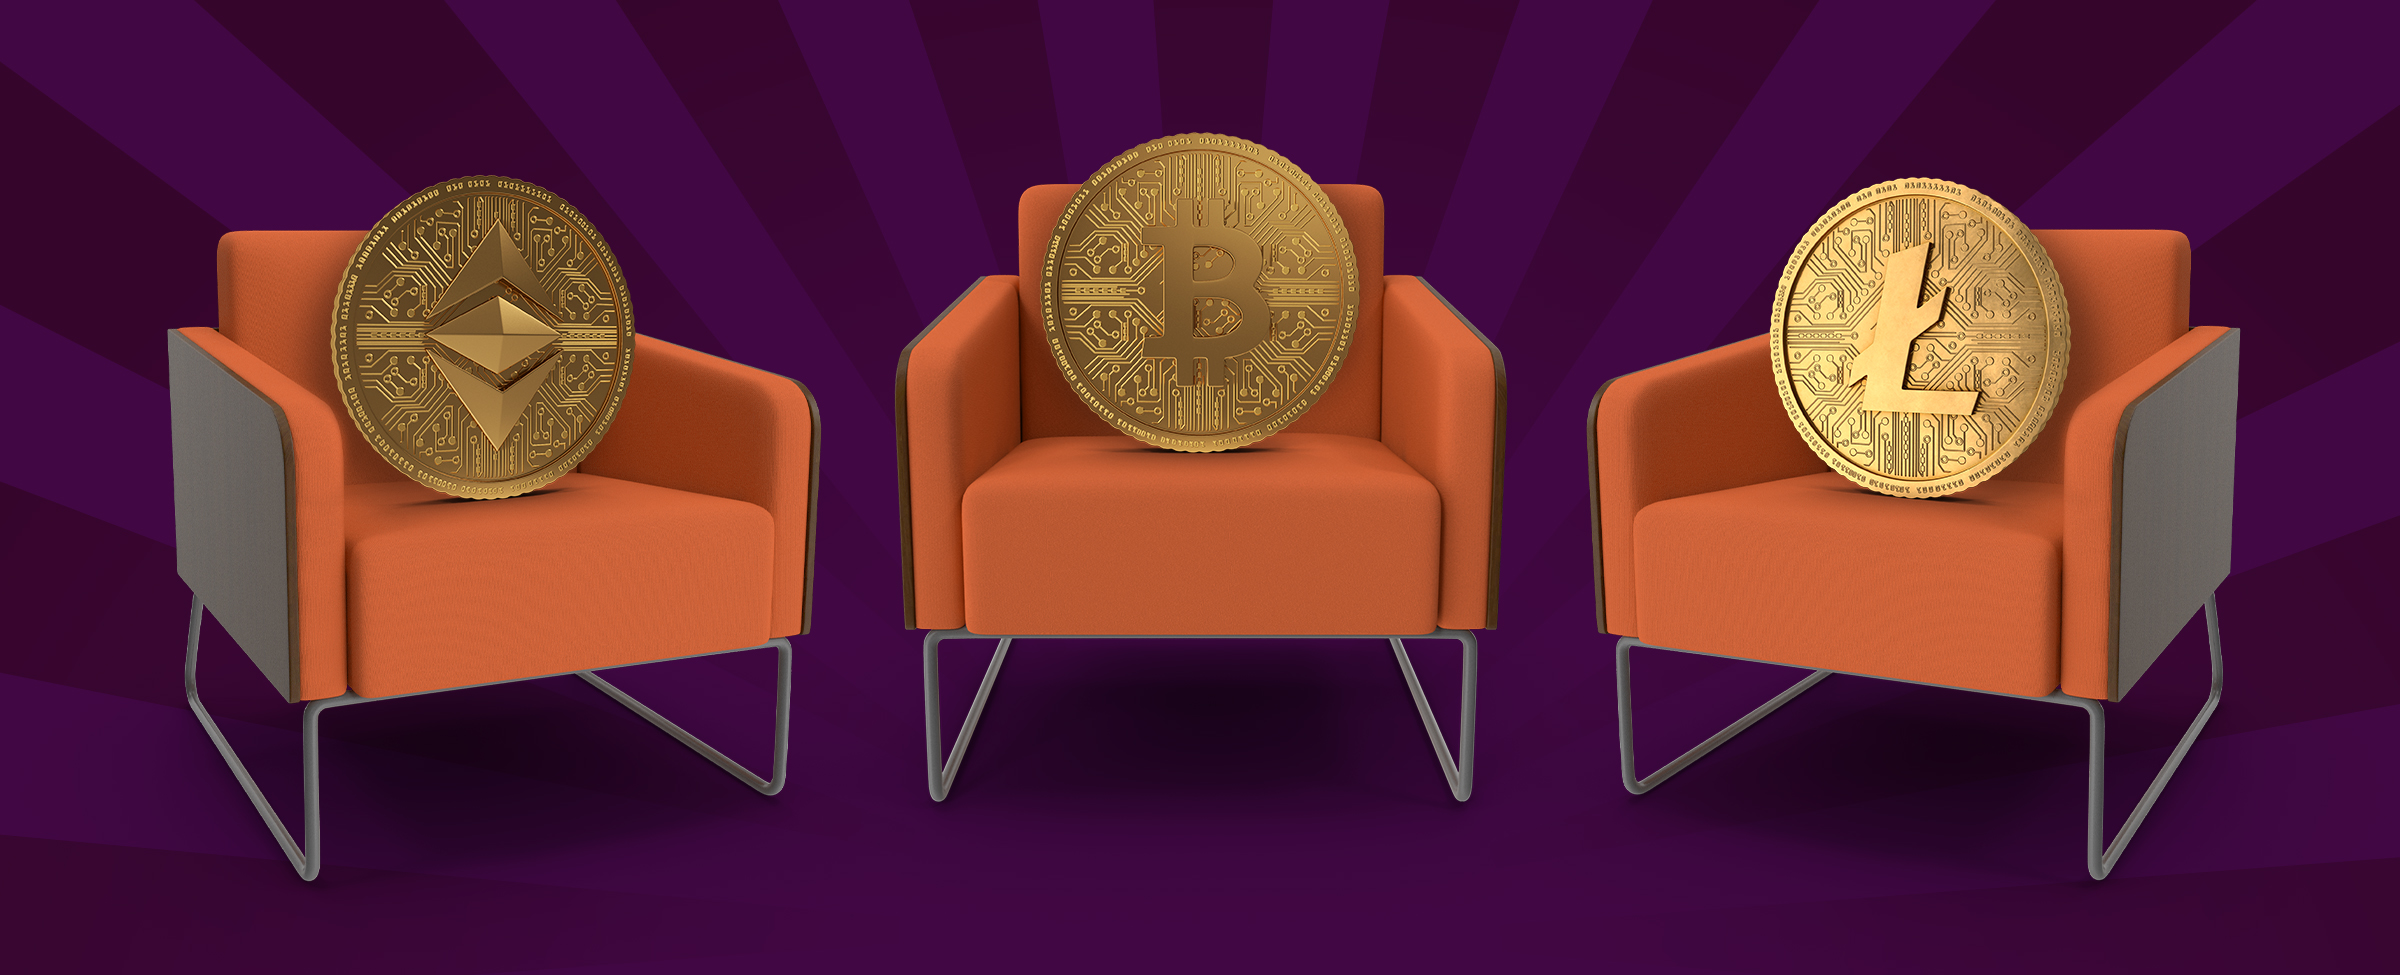 Three vintage-style orange padded are arranged side by side, each holding an oversized illustrated cryptocurrency coin including Bitcoin and Ethereum. Behind, we see a two-toned purple hue background.